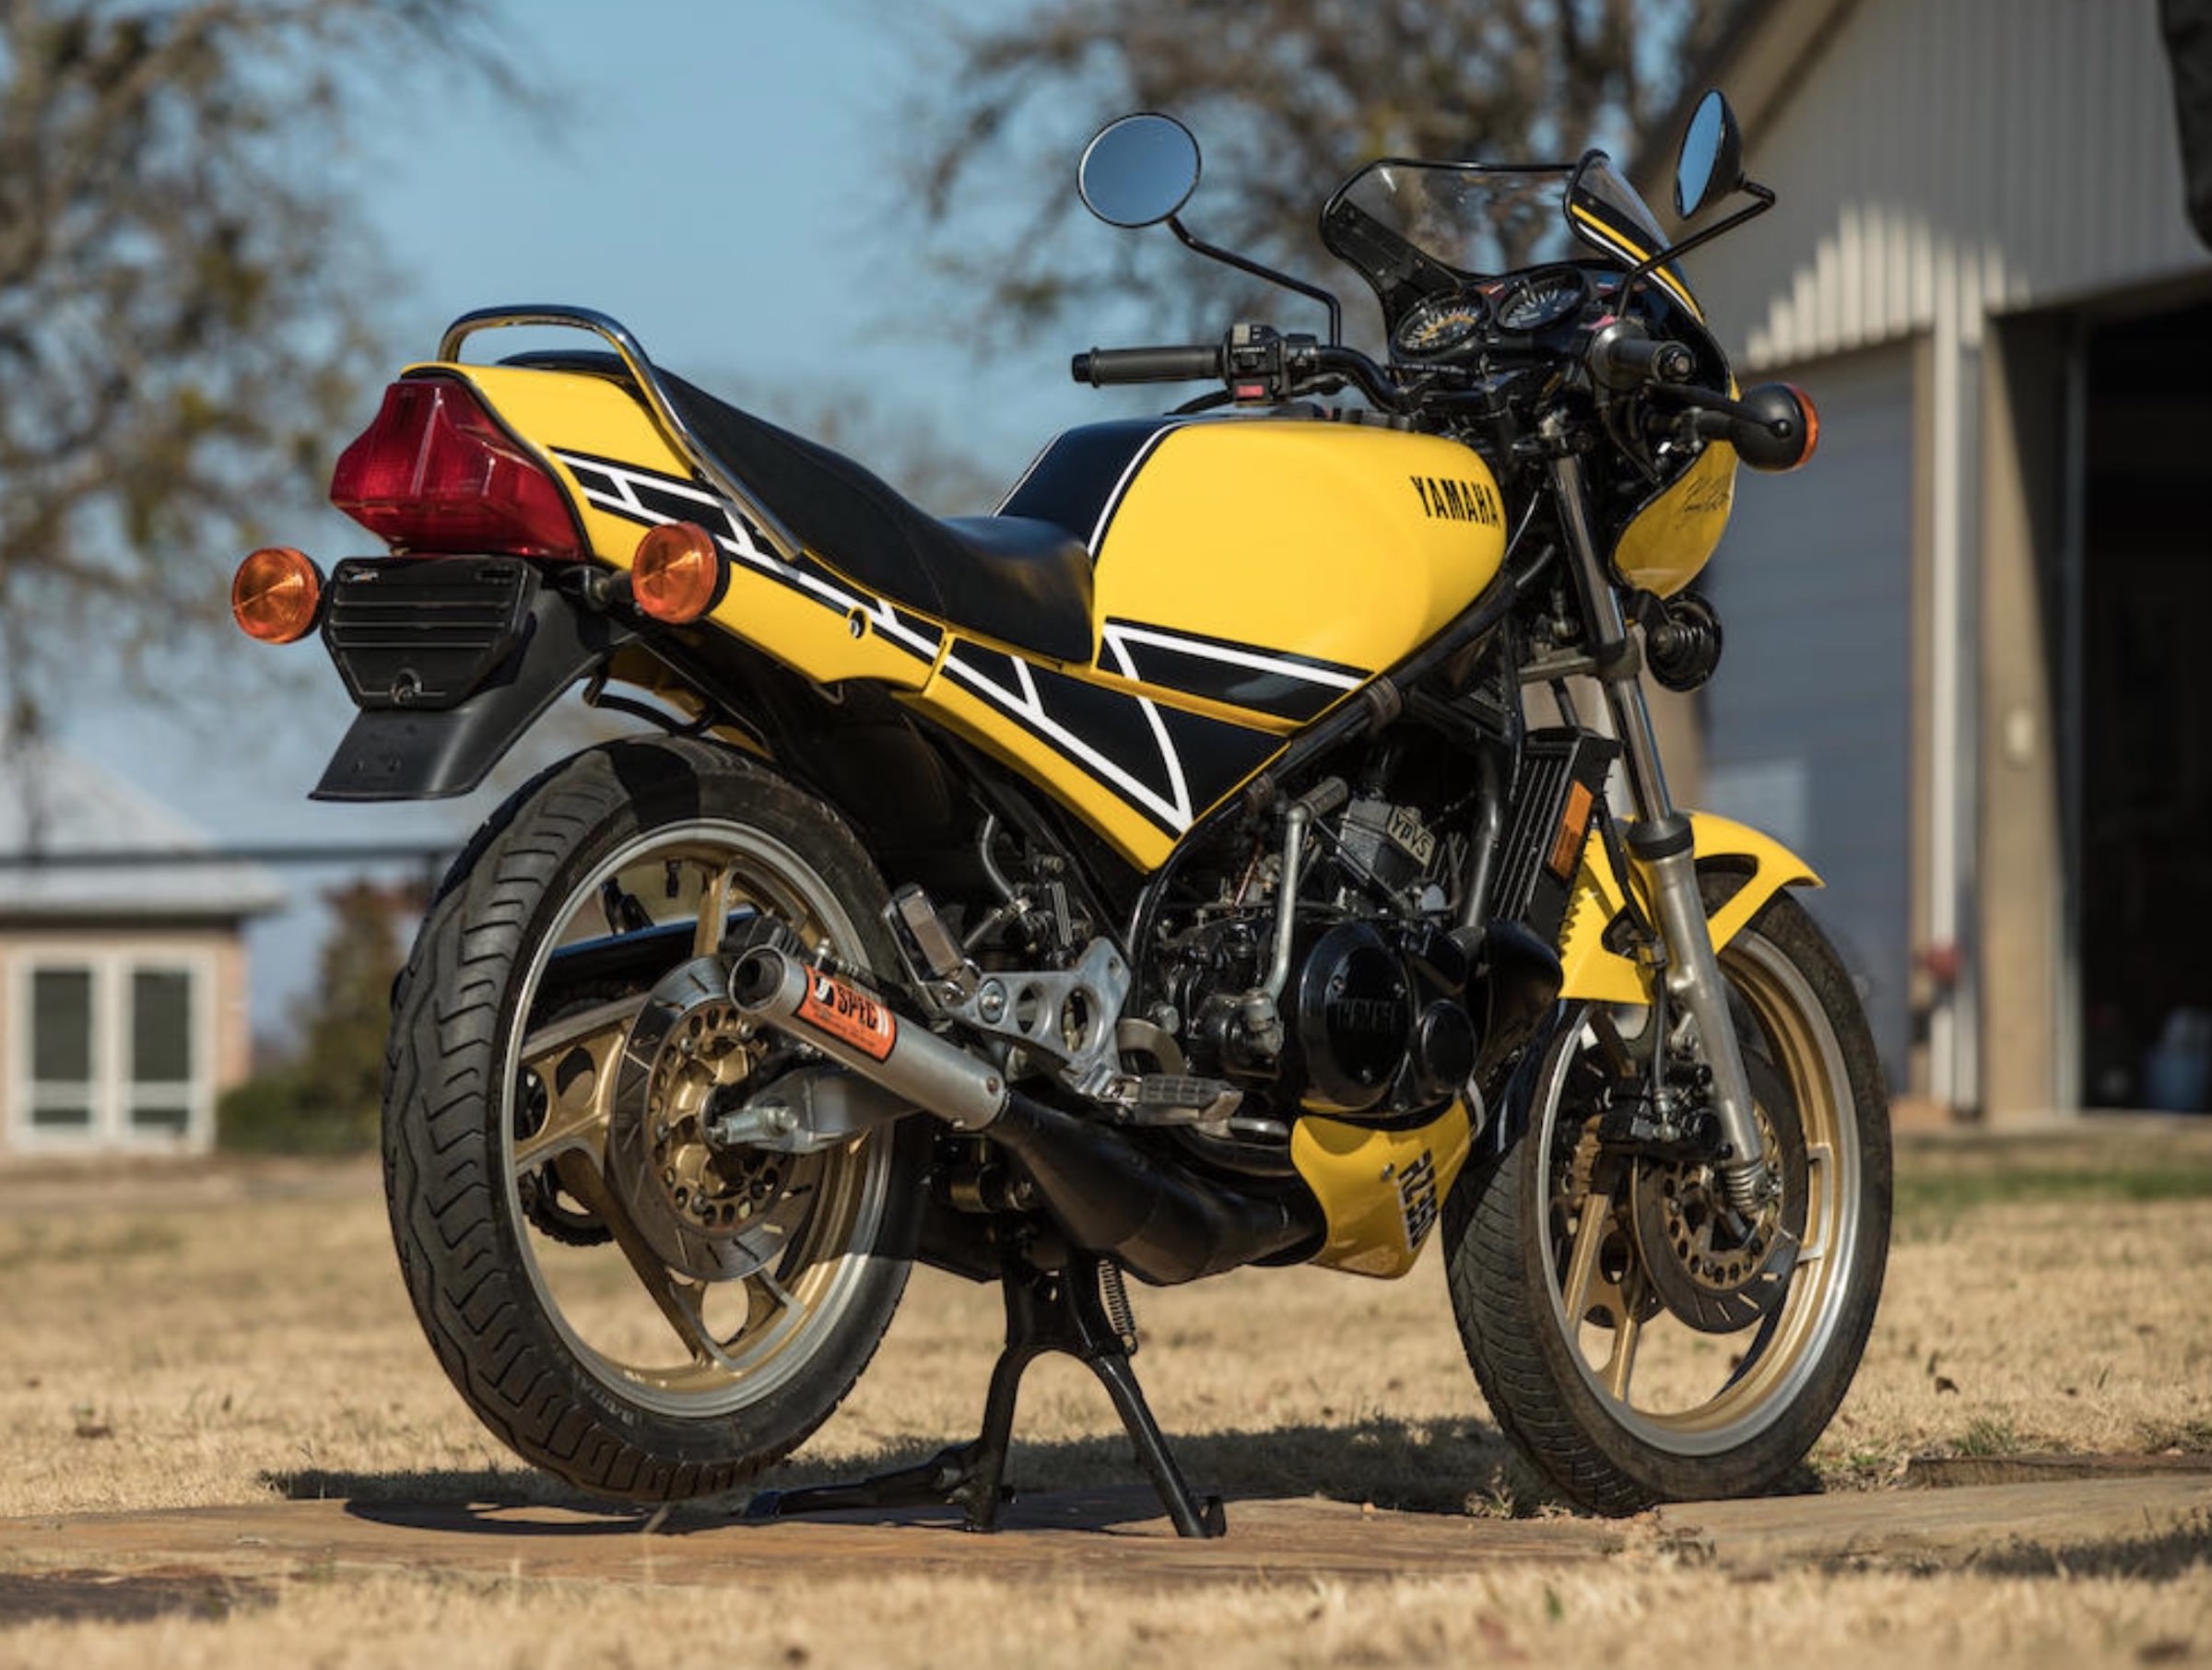 The Last Legal Two Stroke Street Bike Sold In The Usa Yamaha Rz350 Kenny Roberts Edition